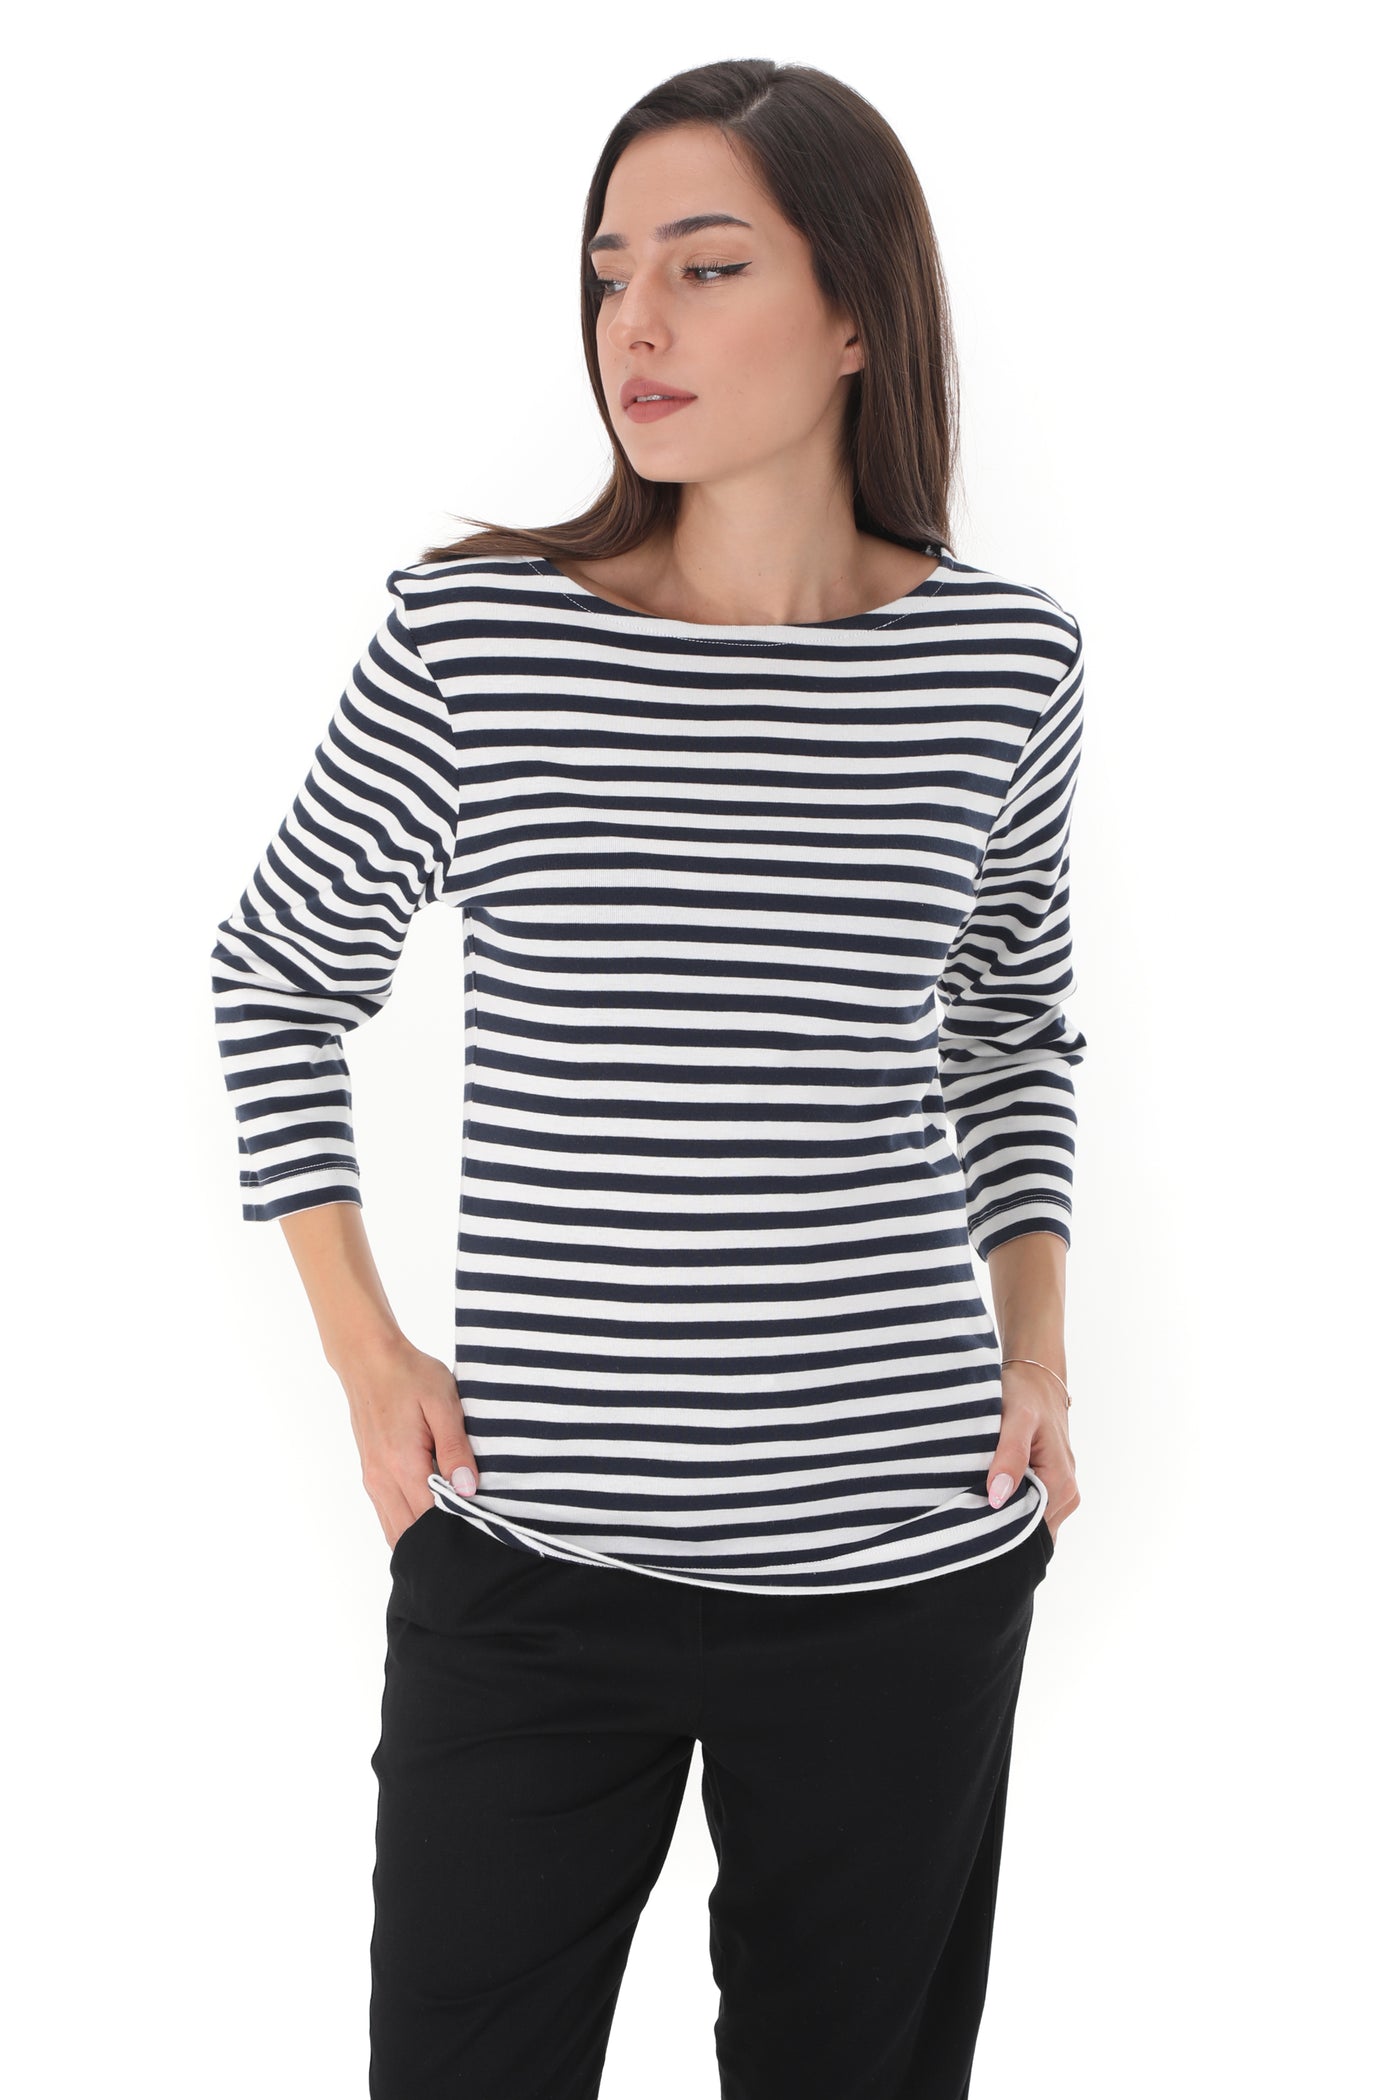 Chassca Boat Neck 3/4 Sleeve Striped T-Shirt